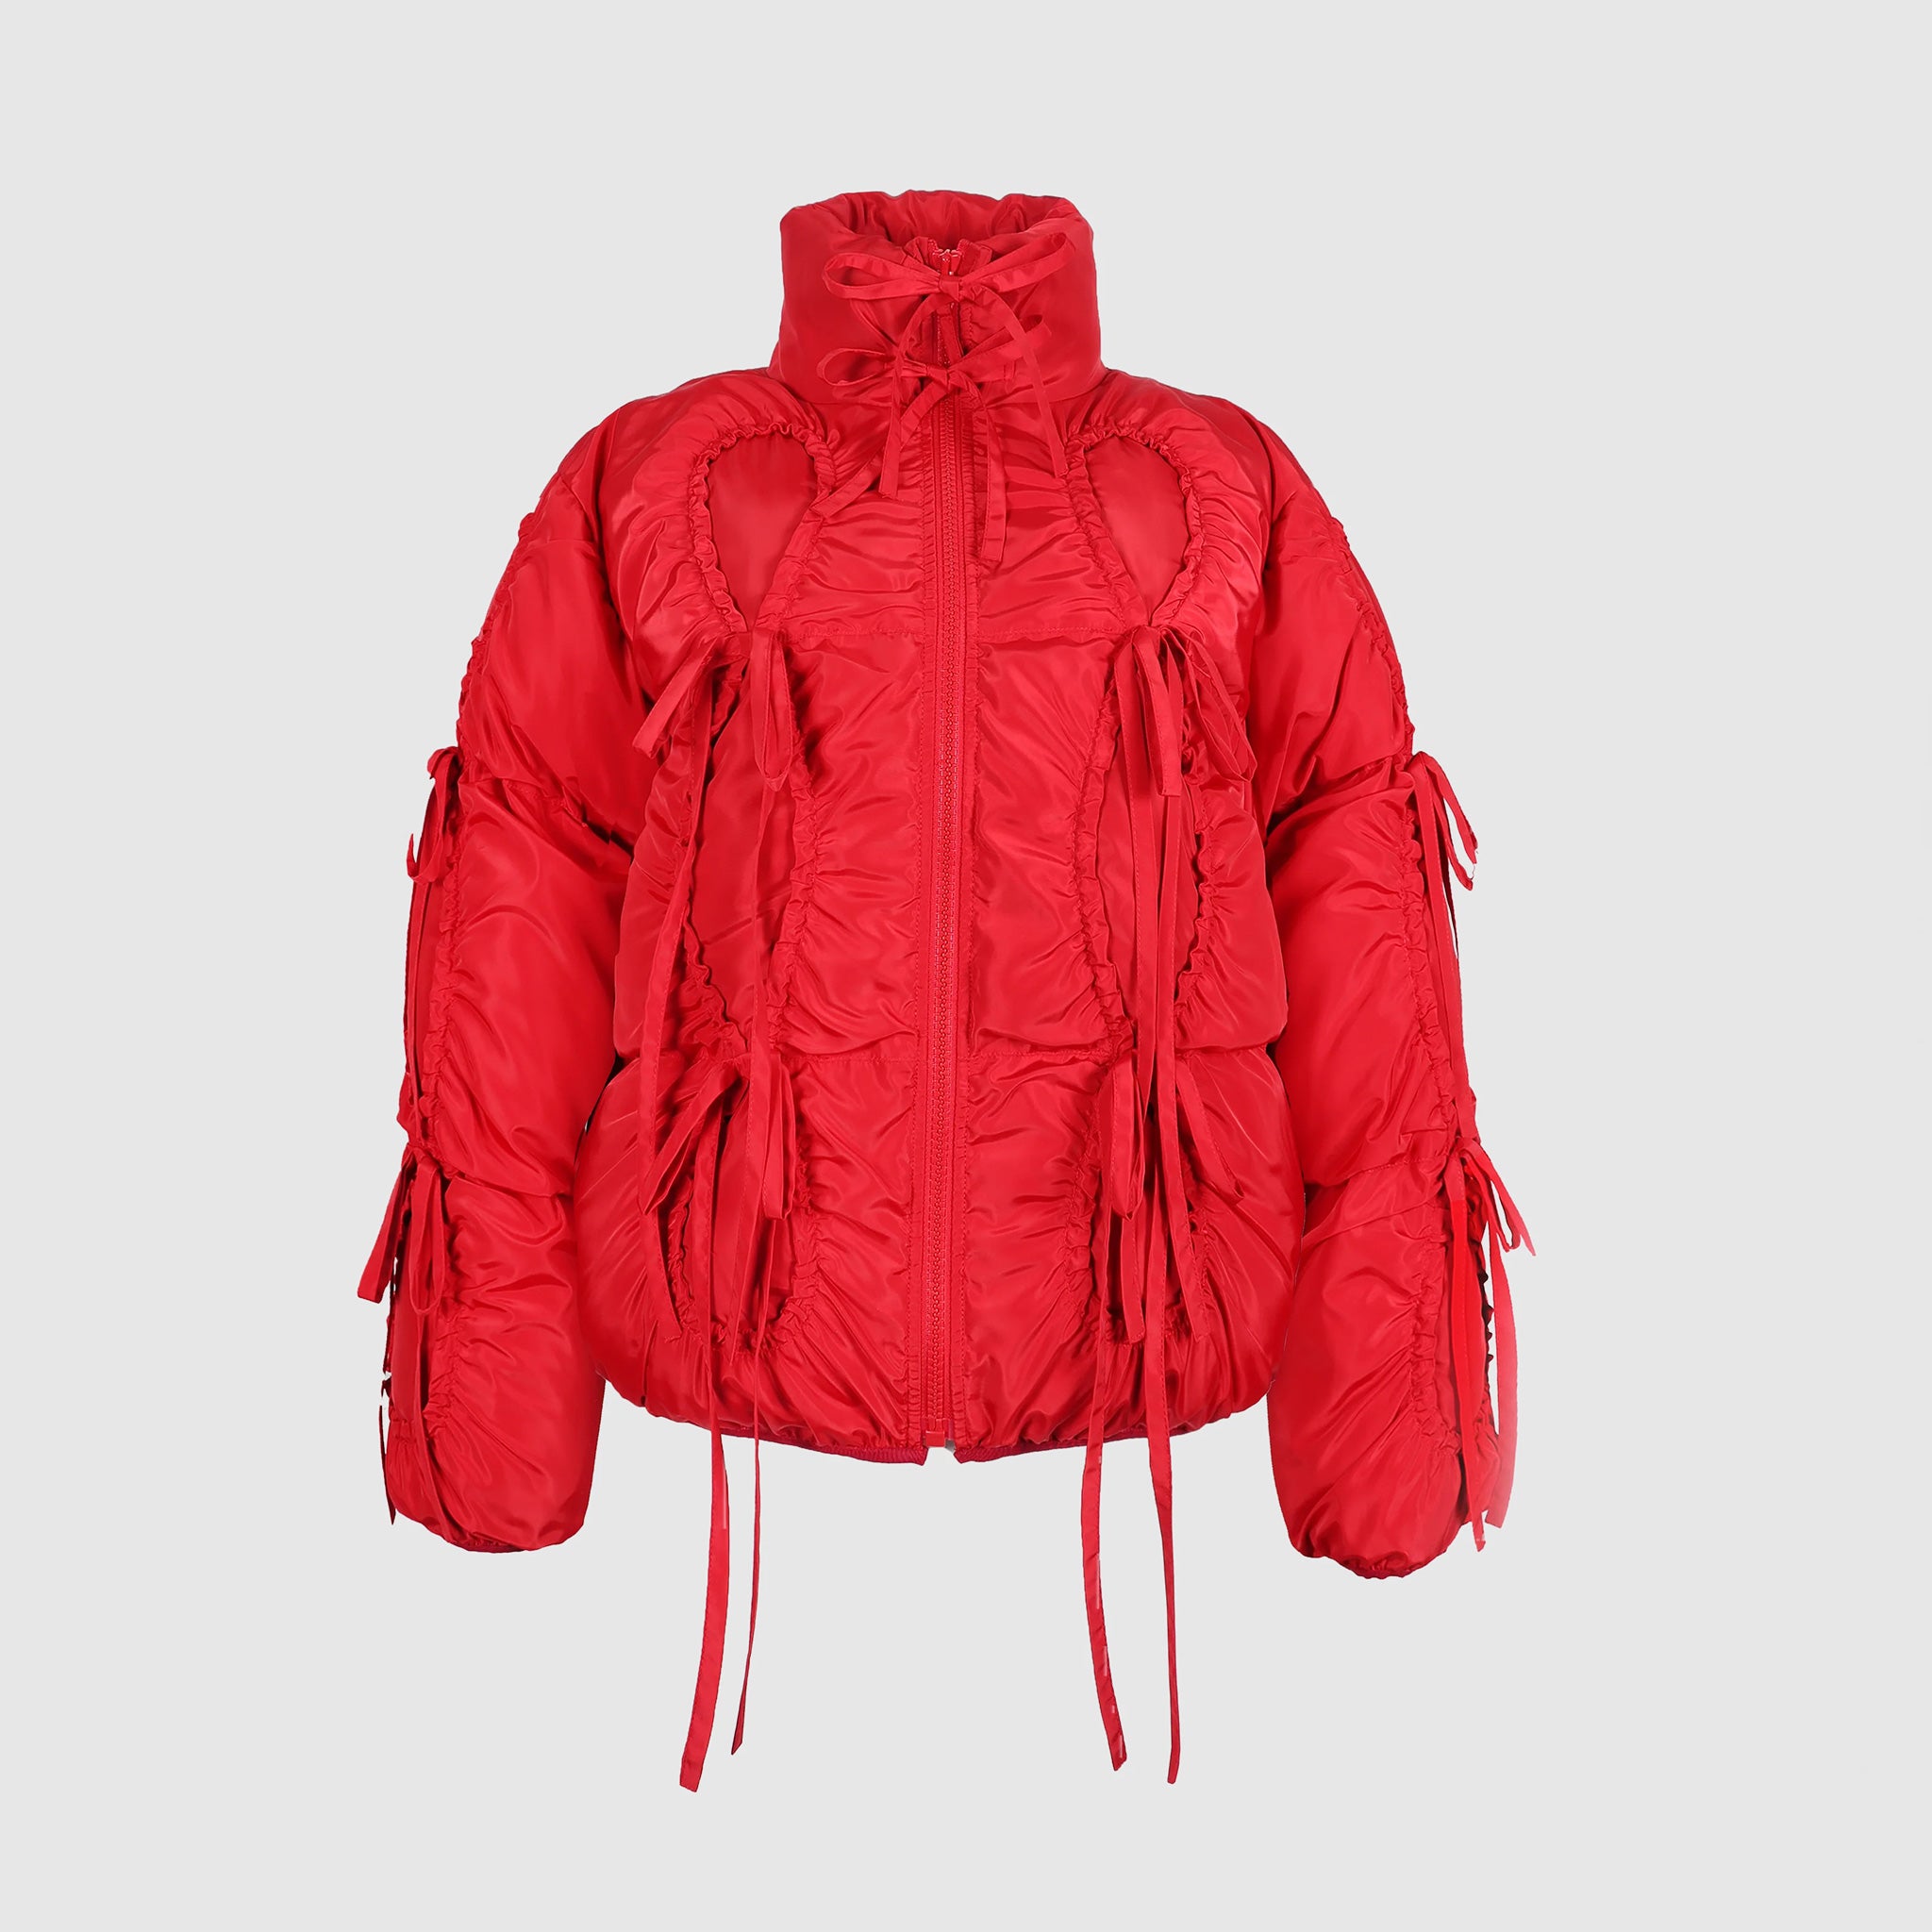 Flat photo of the Bommy Jacket in red. The jacket features bow details ruching all over the jacket.